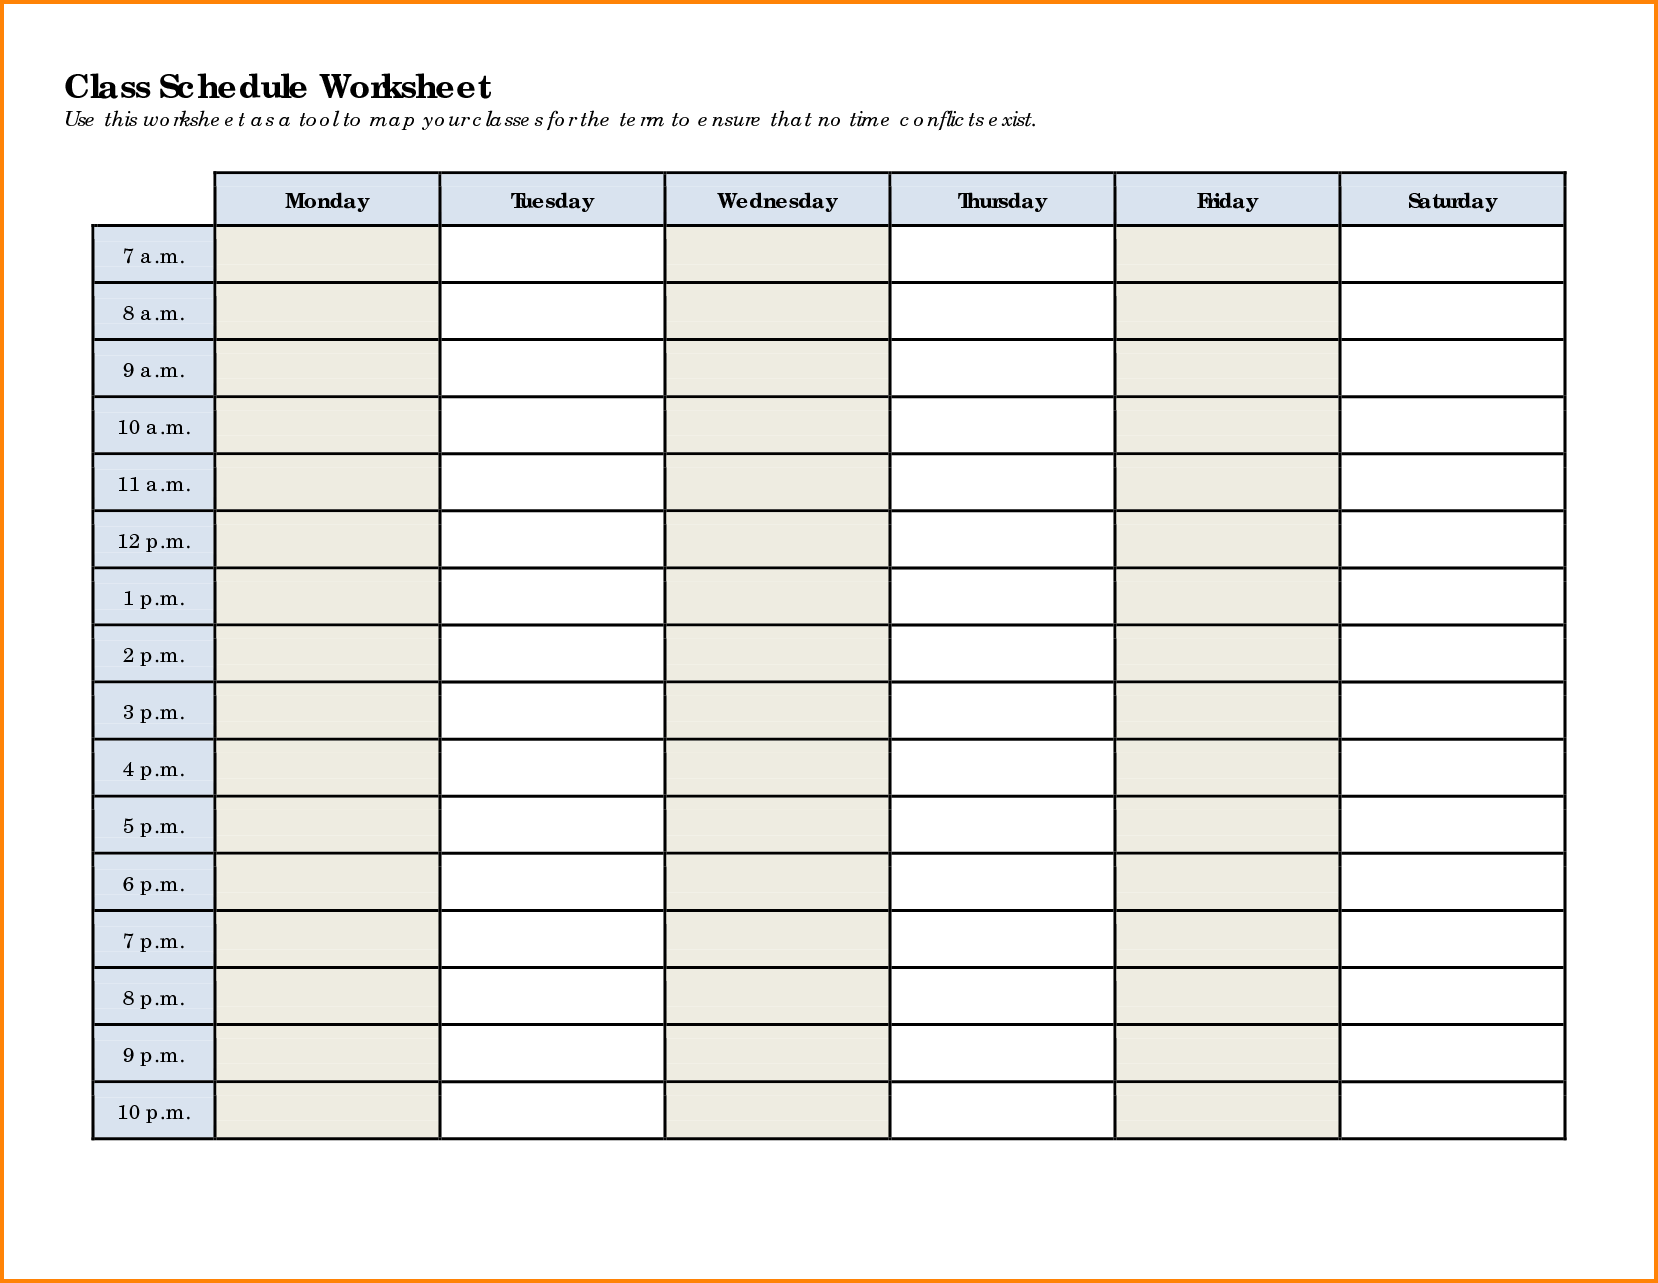 26-create-hourly-class-schedule-template-for-ms-word-by-hourly-class-schedule-template-cards